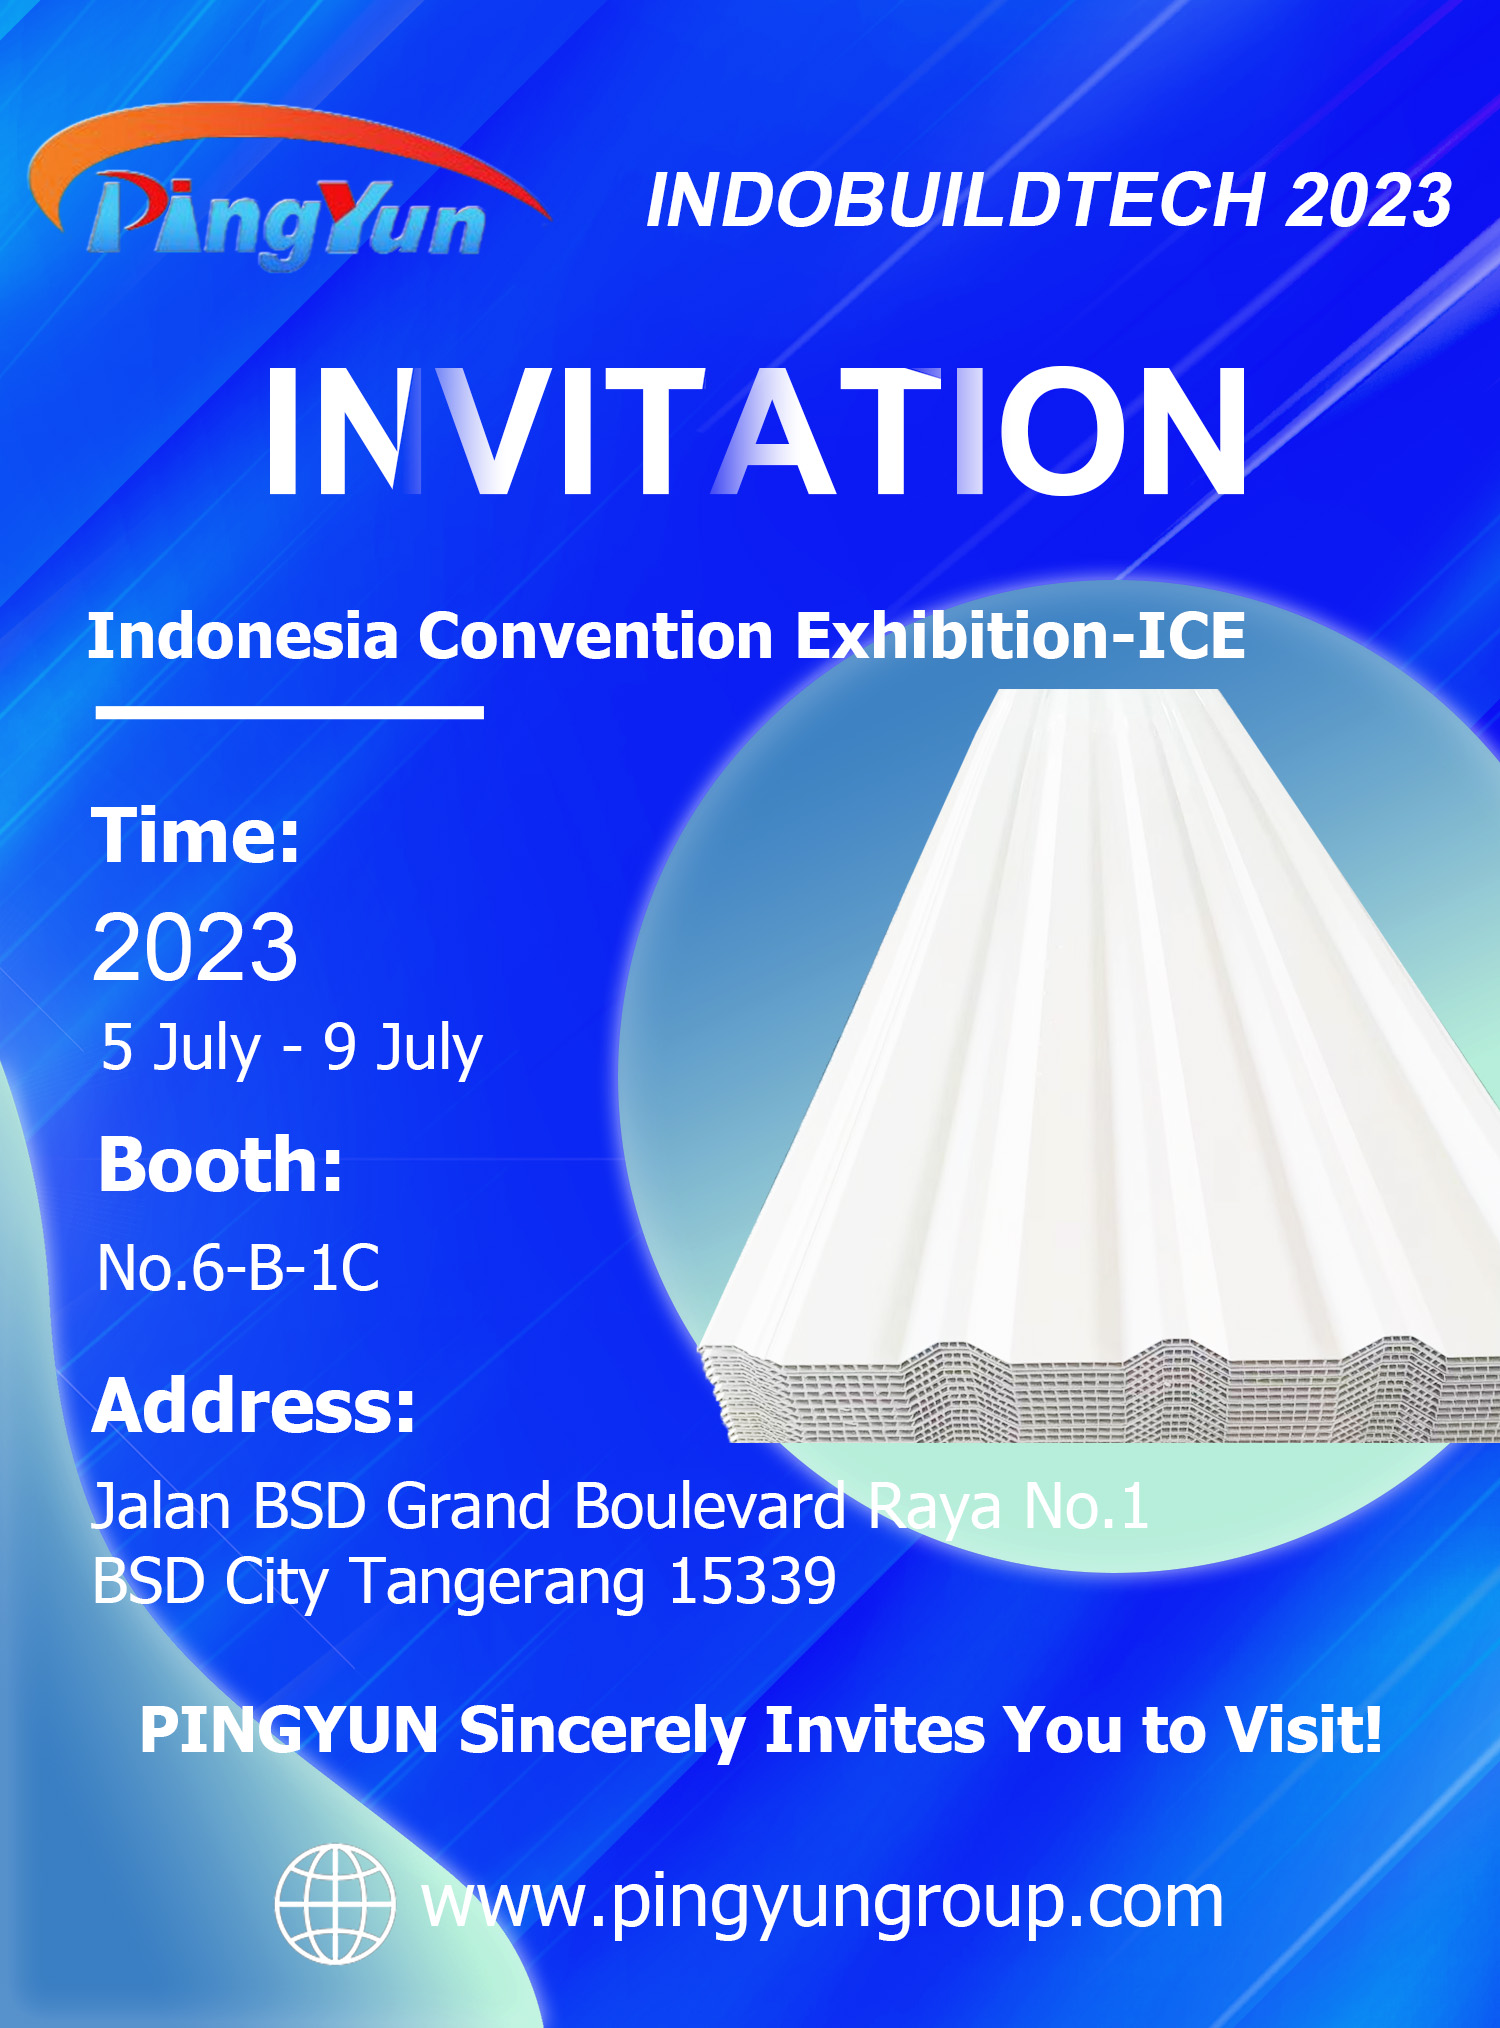 Pingyun Group is waiting for you at the Indobuildtech 2023